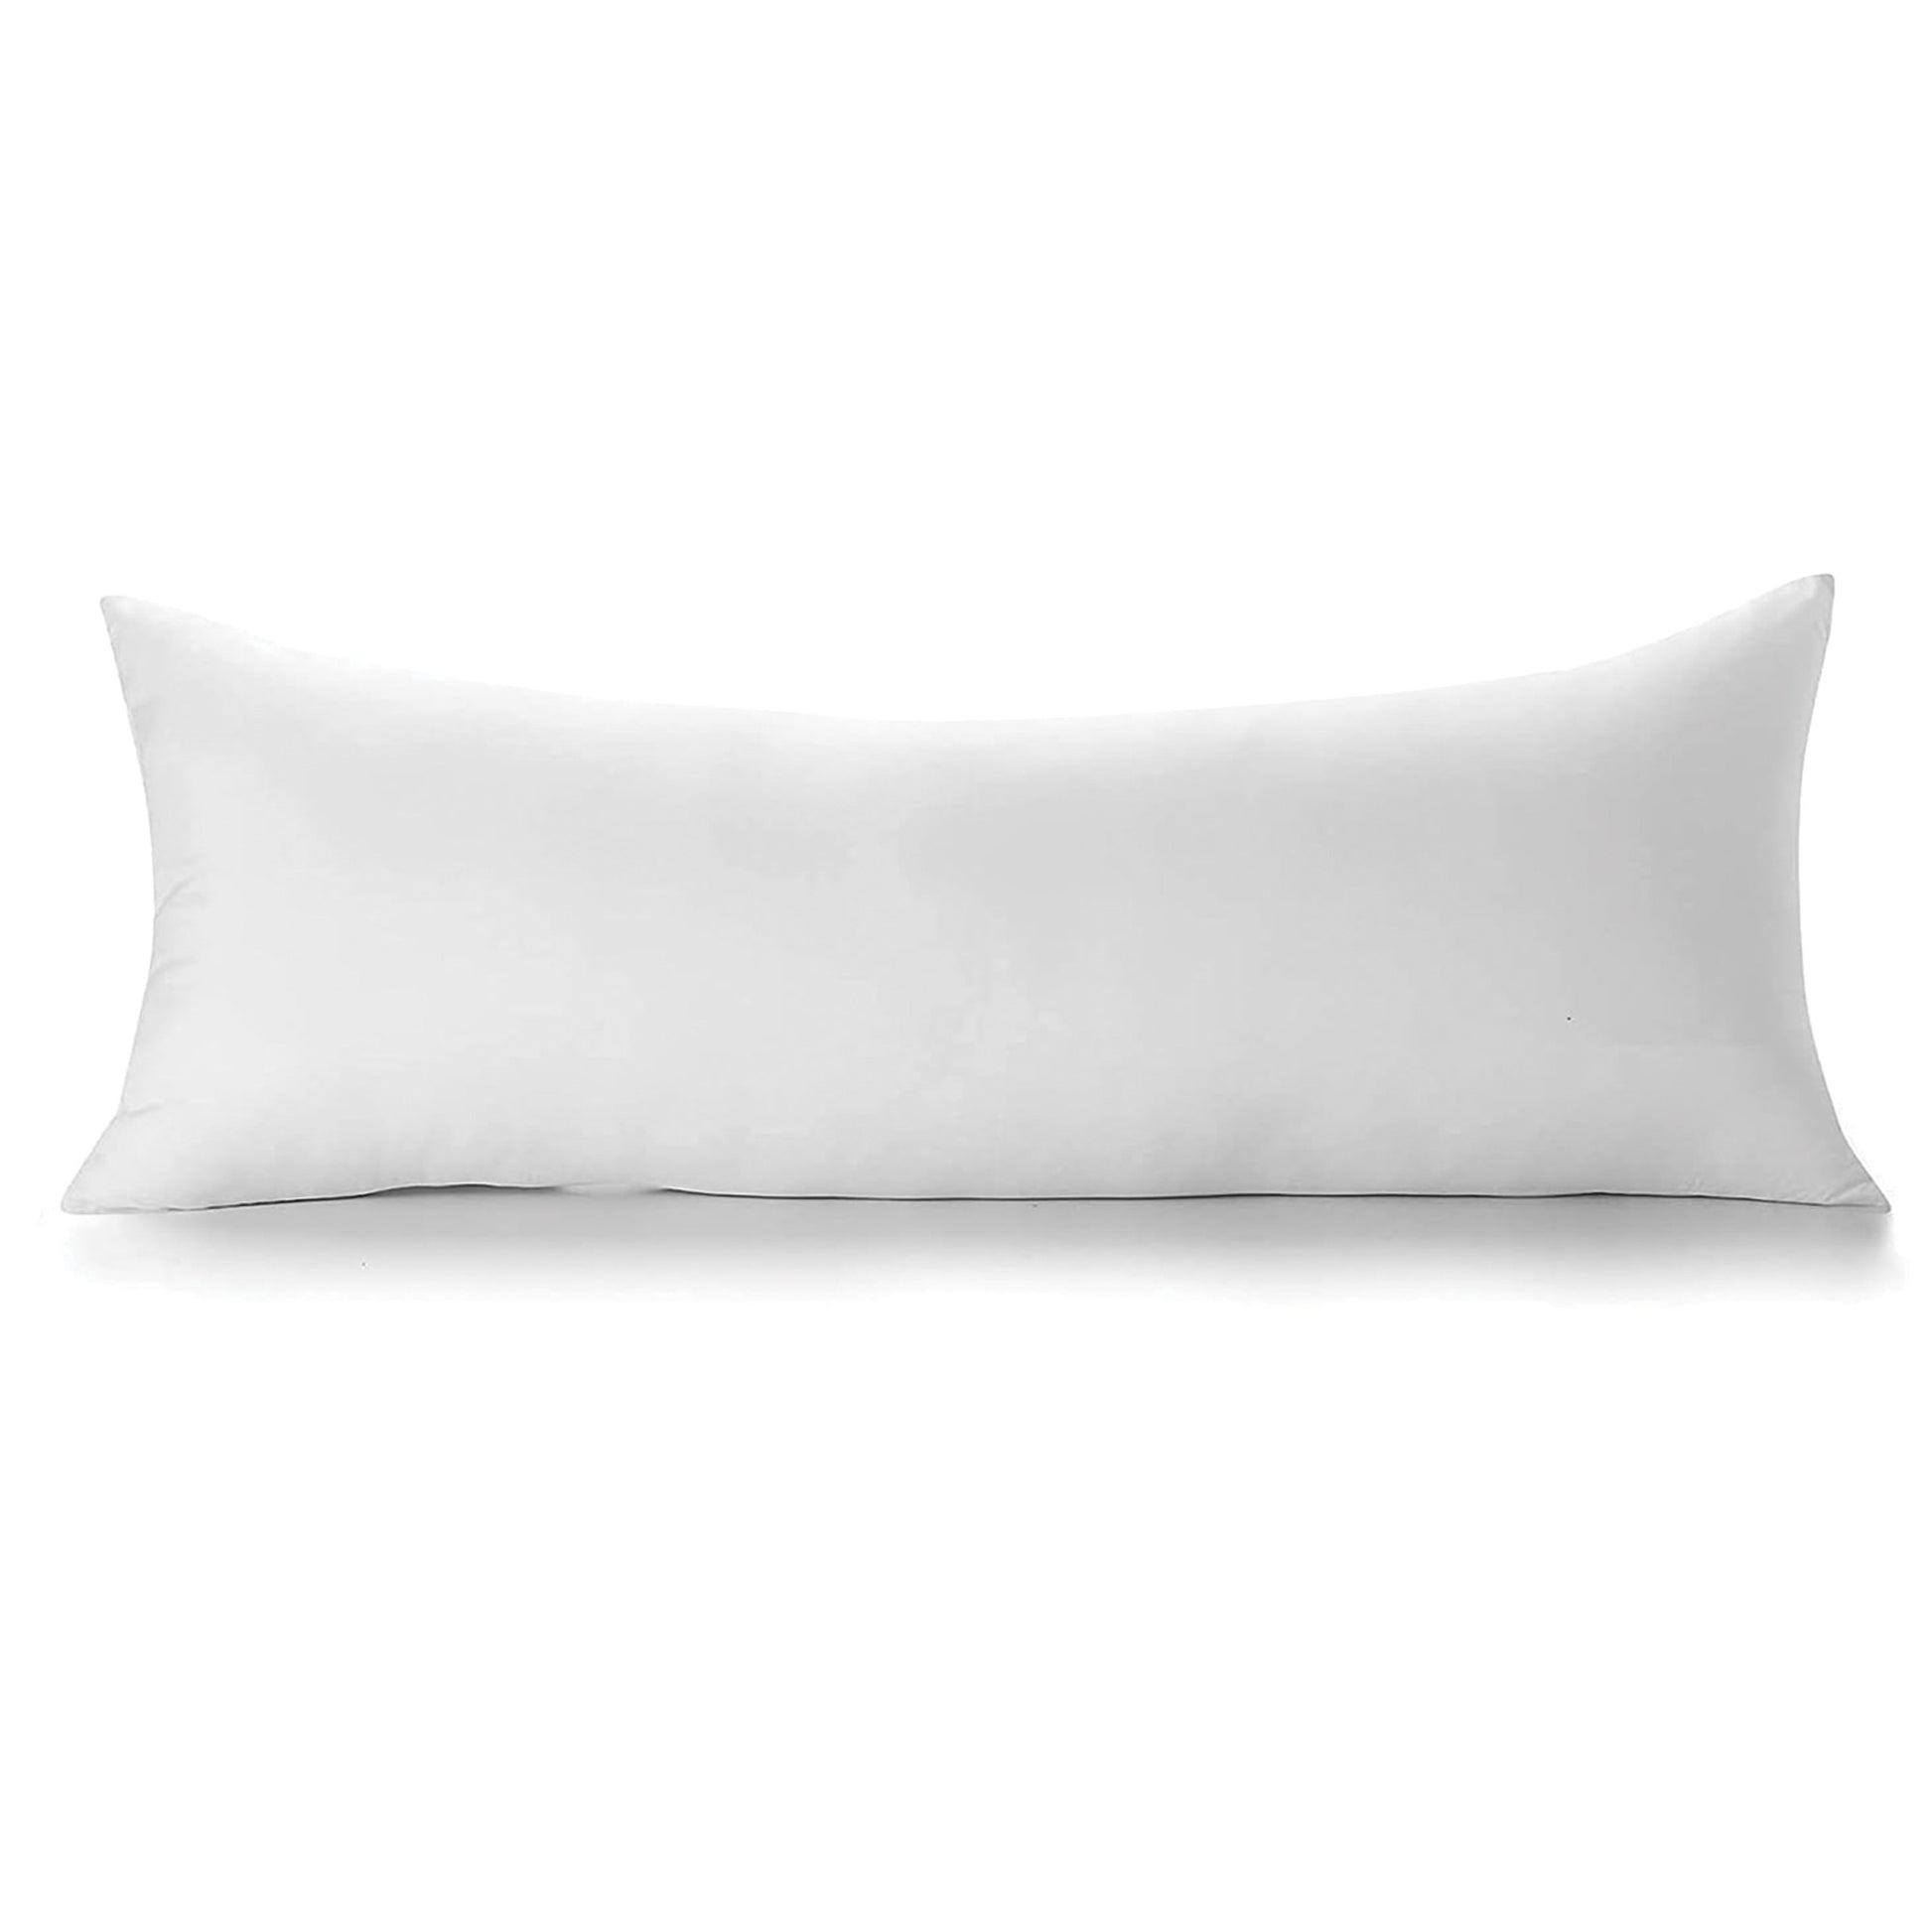 An image of a pristine white body pillow, filled with 100% goose down and featuring a plush 600 fill power, promising luxurious softness and comfort